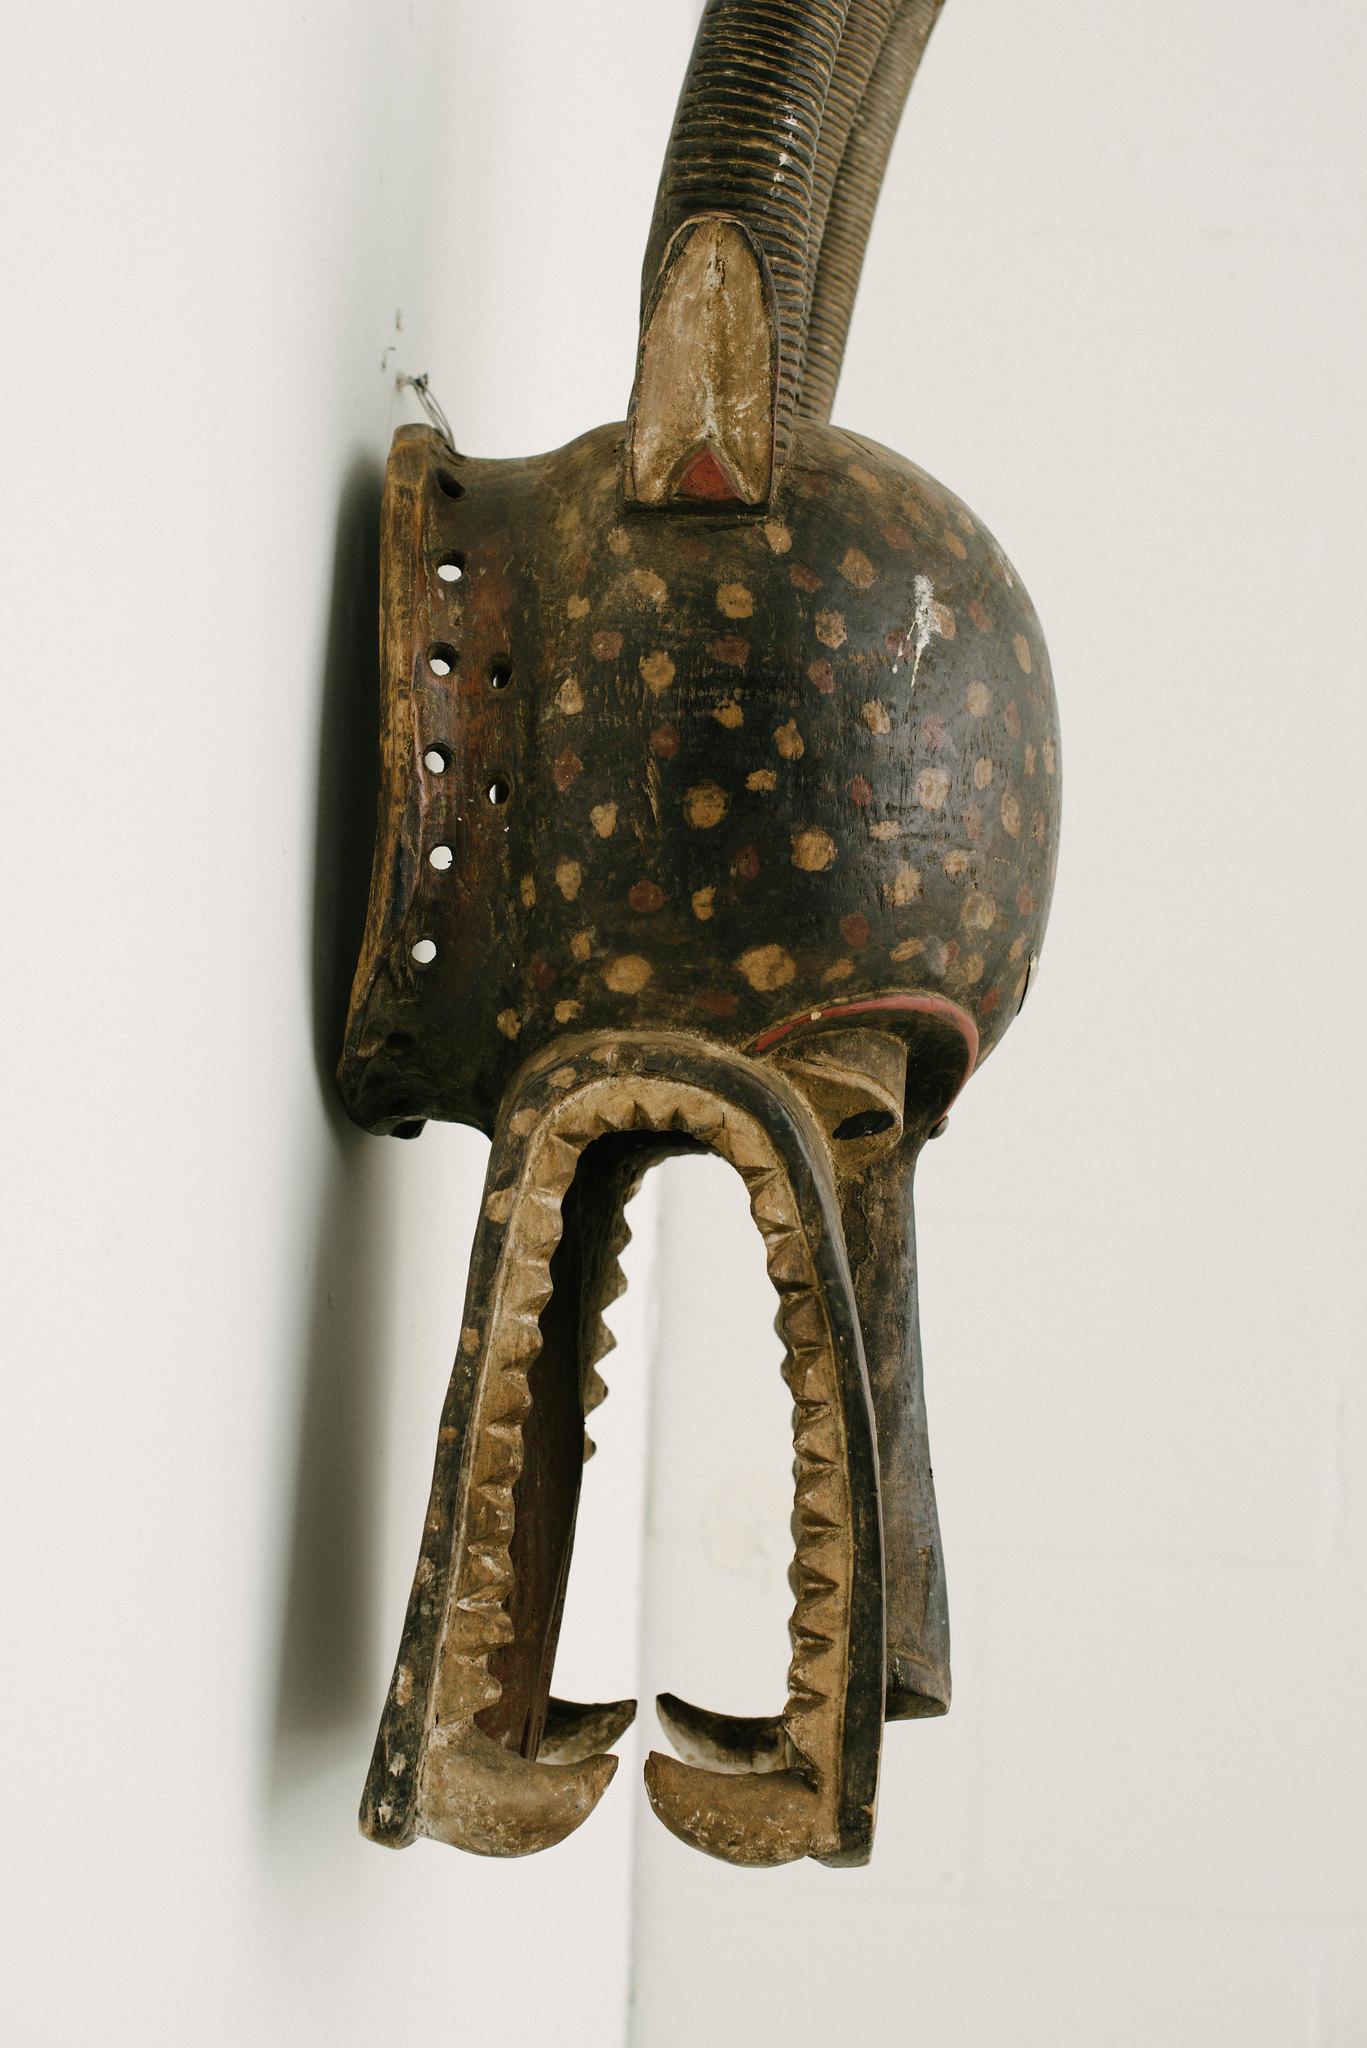 african style masks